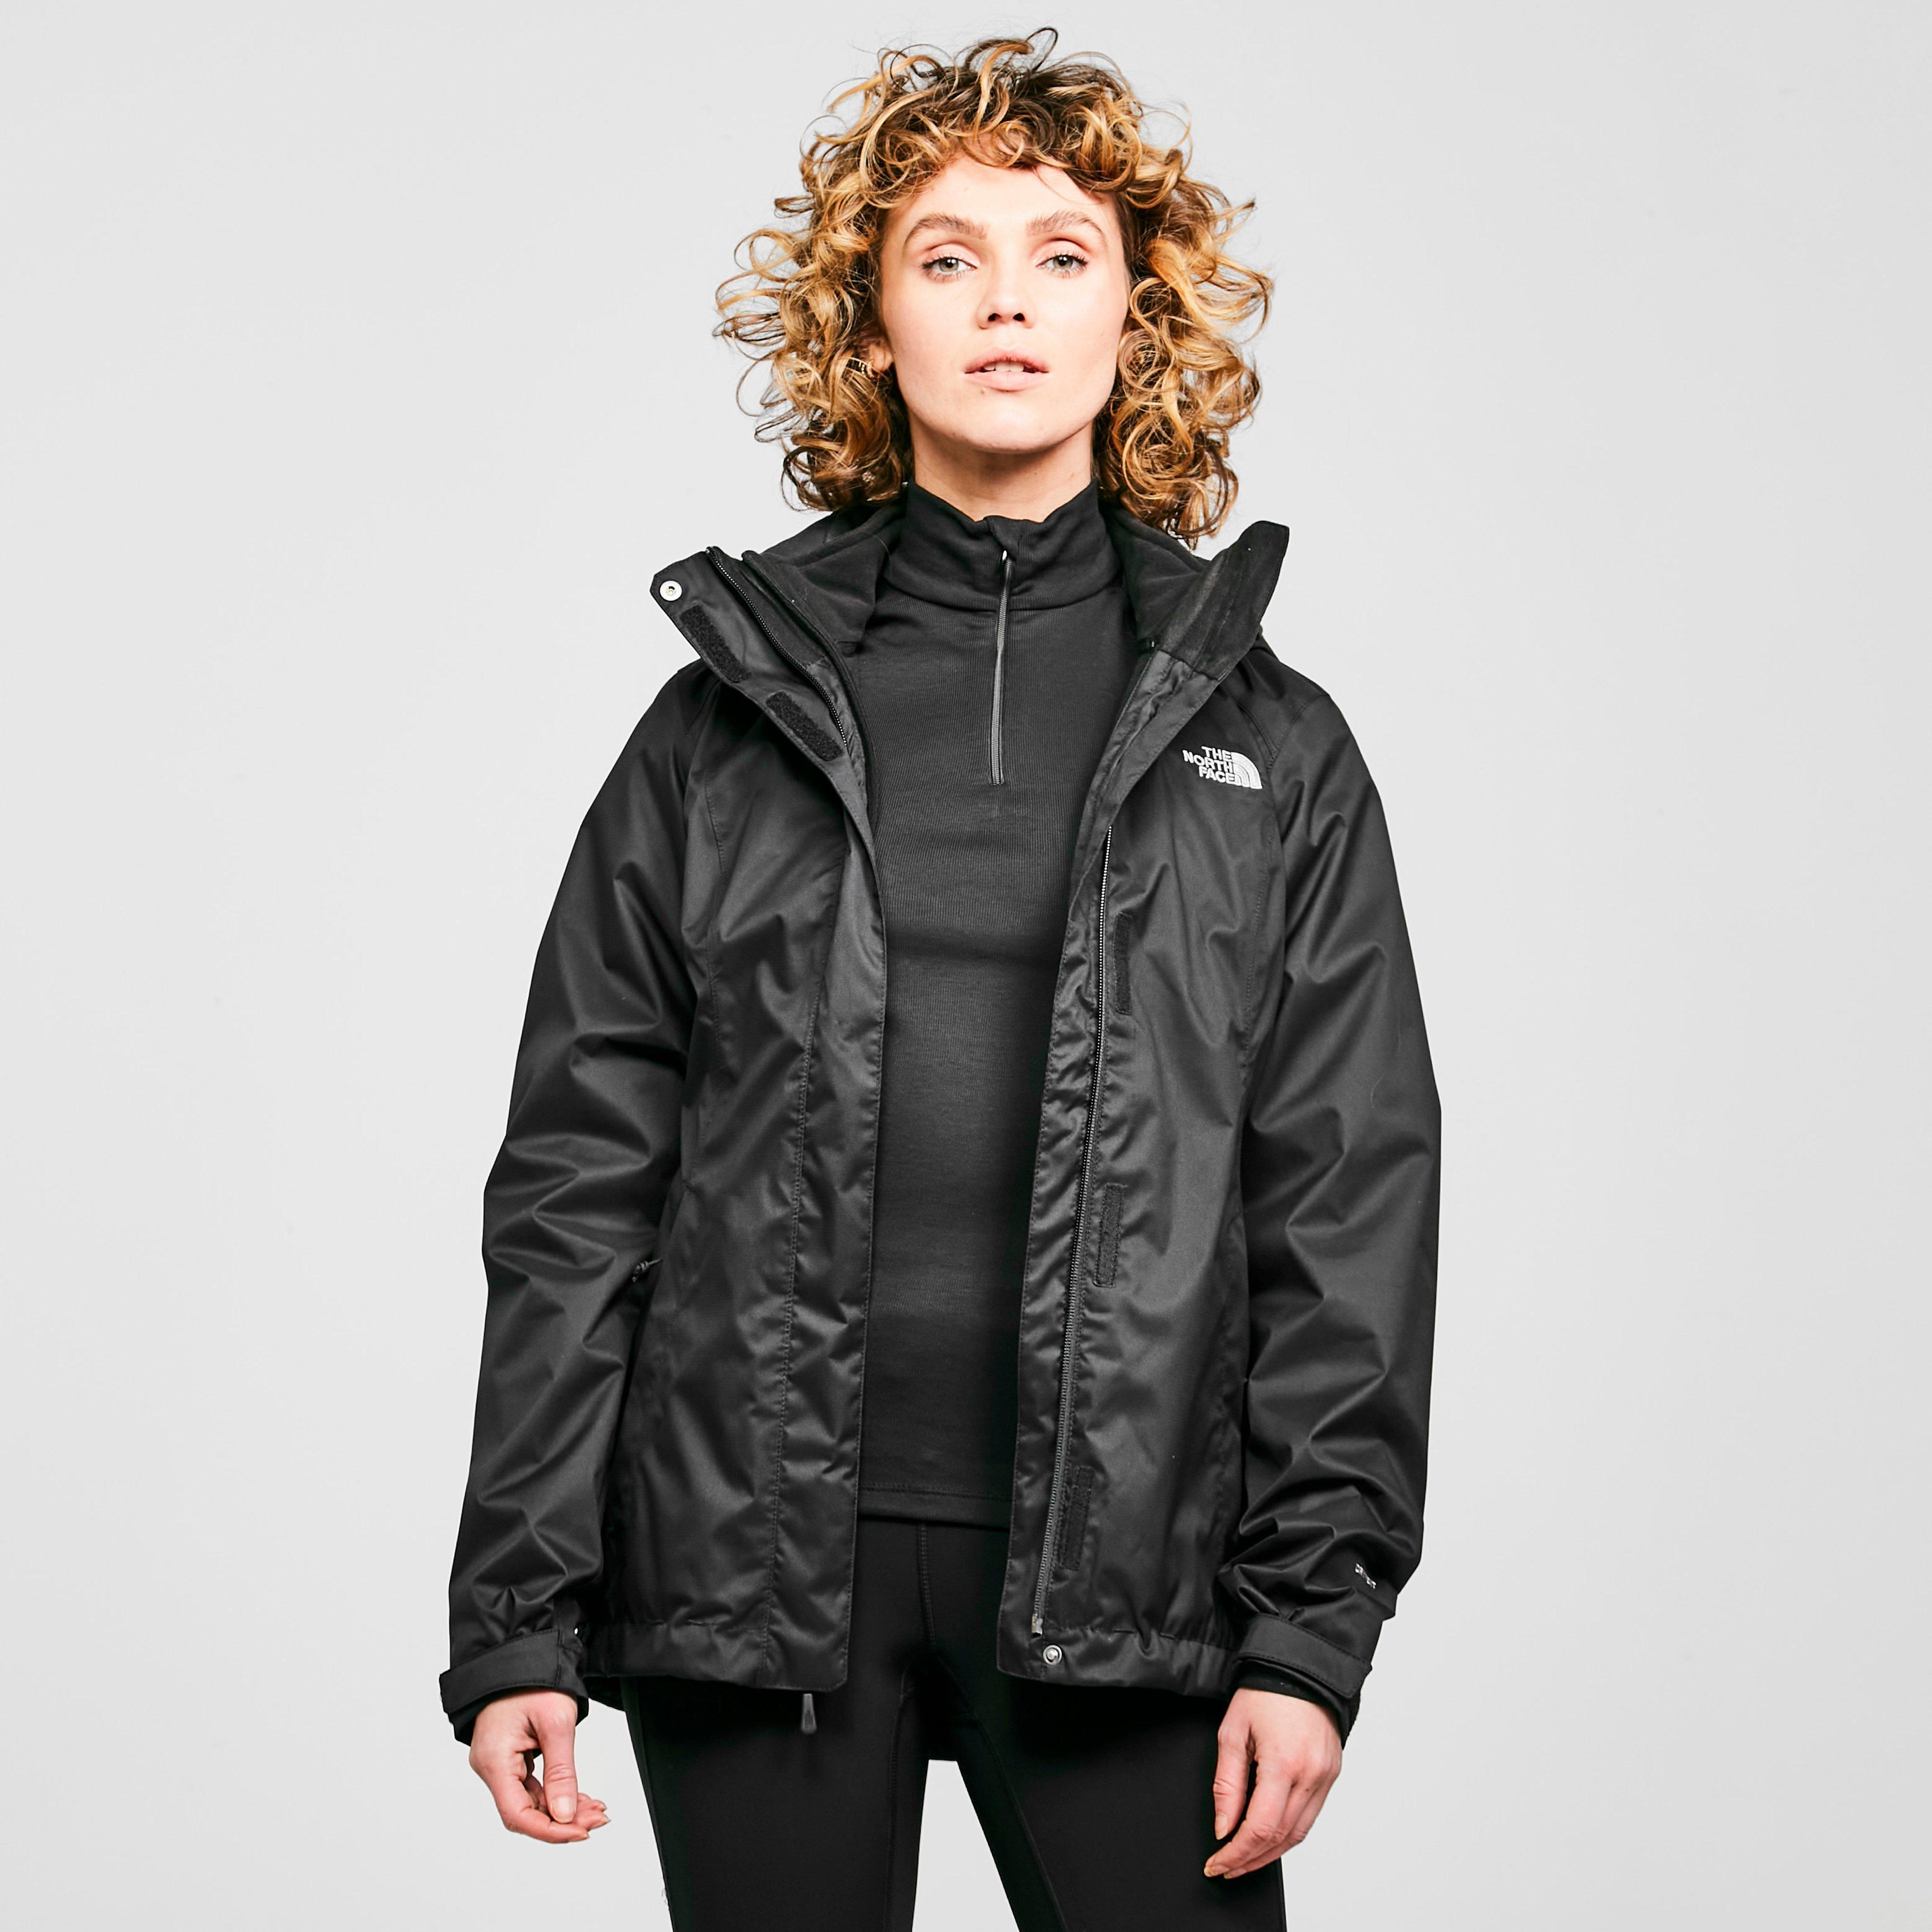 Plus north face jackets for women sale near, American apparel t shirt design, t shirt design template free download. 